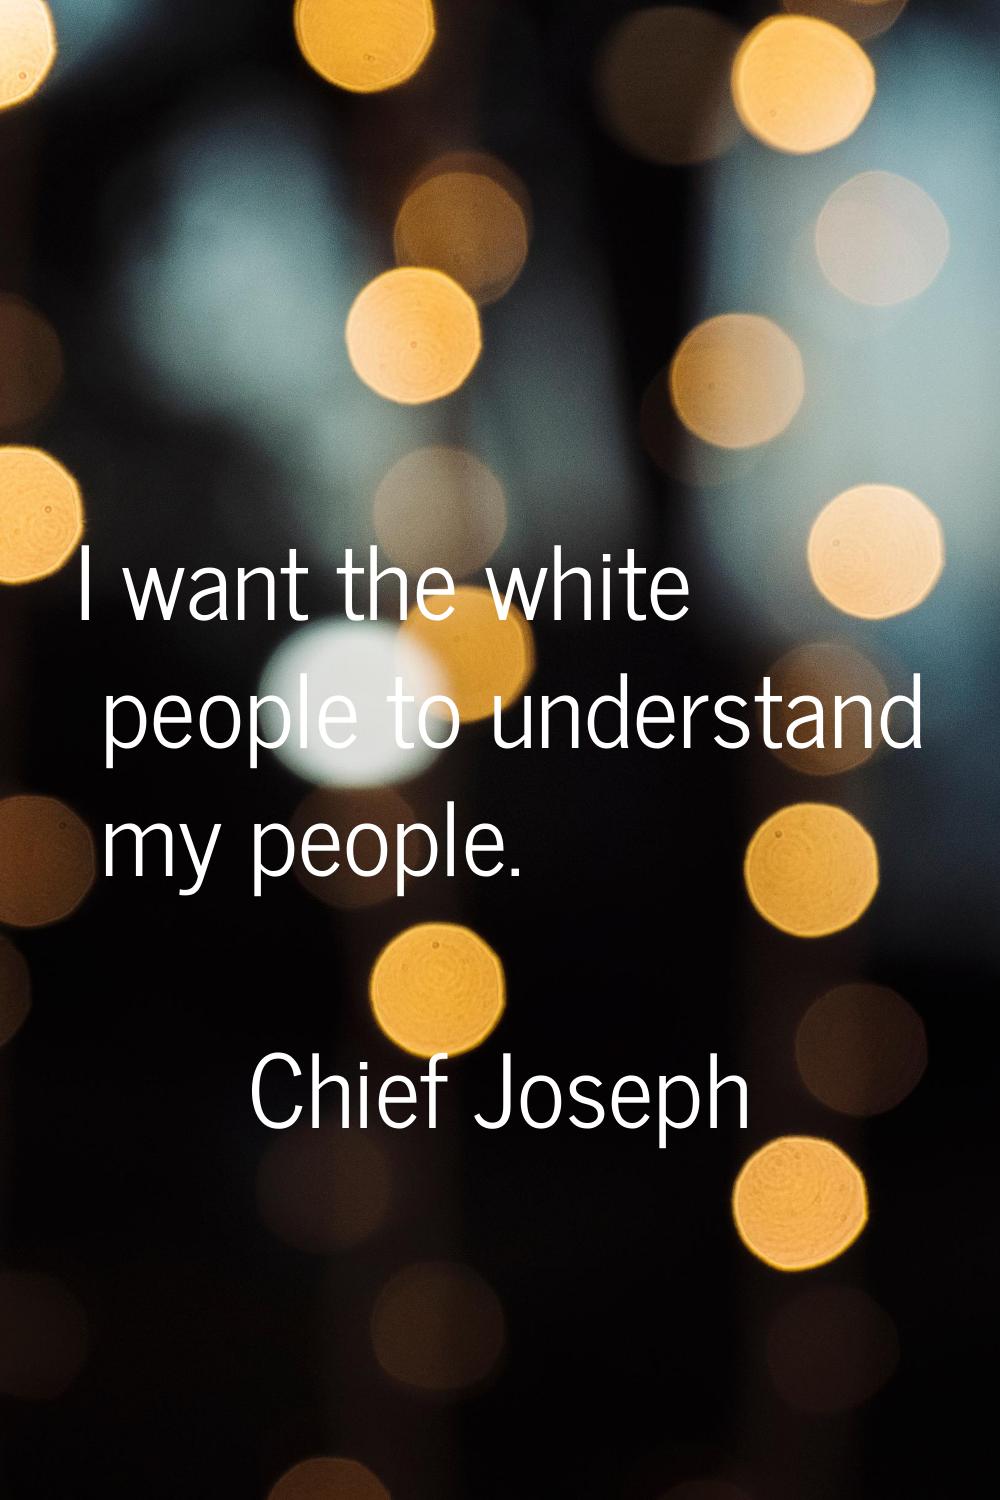 I want the white people to understand my people.